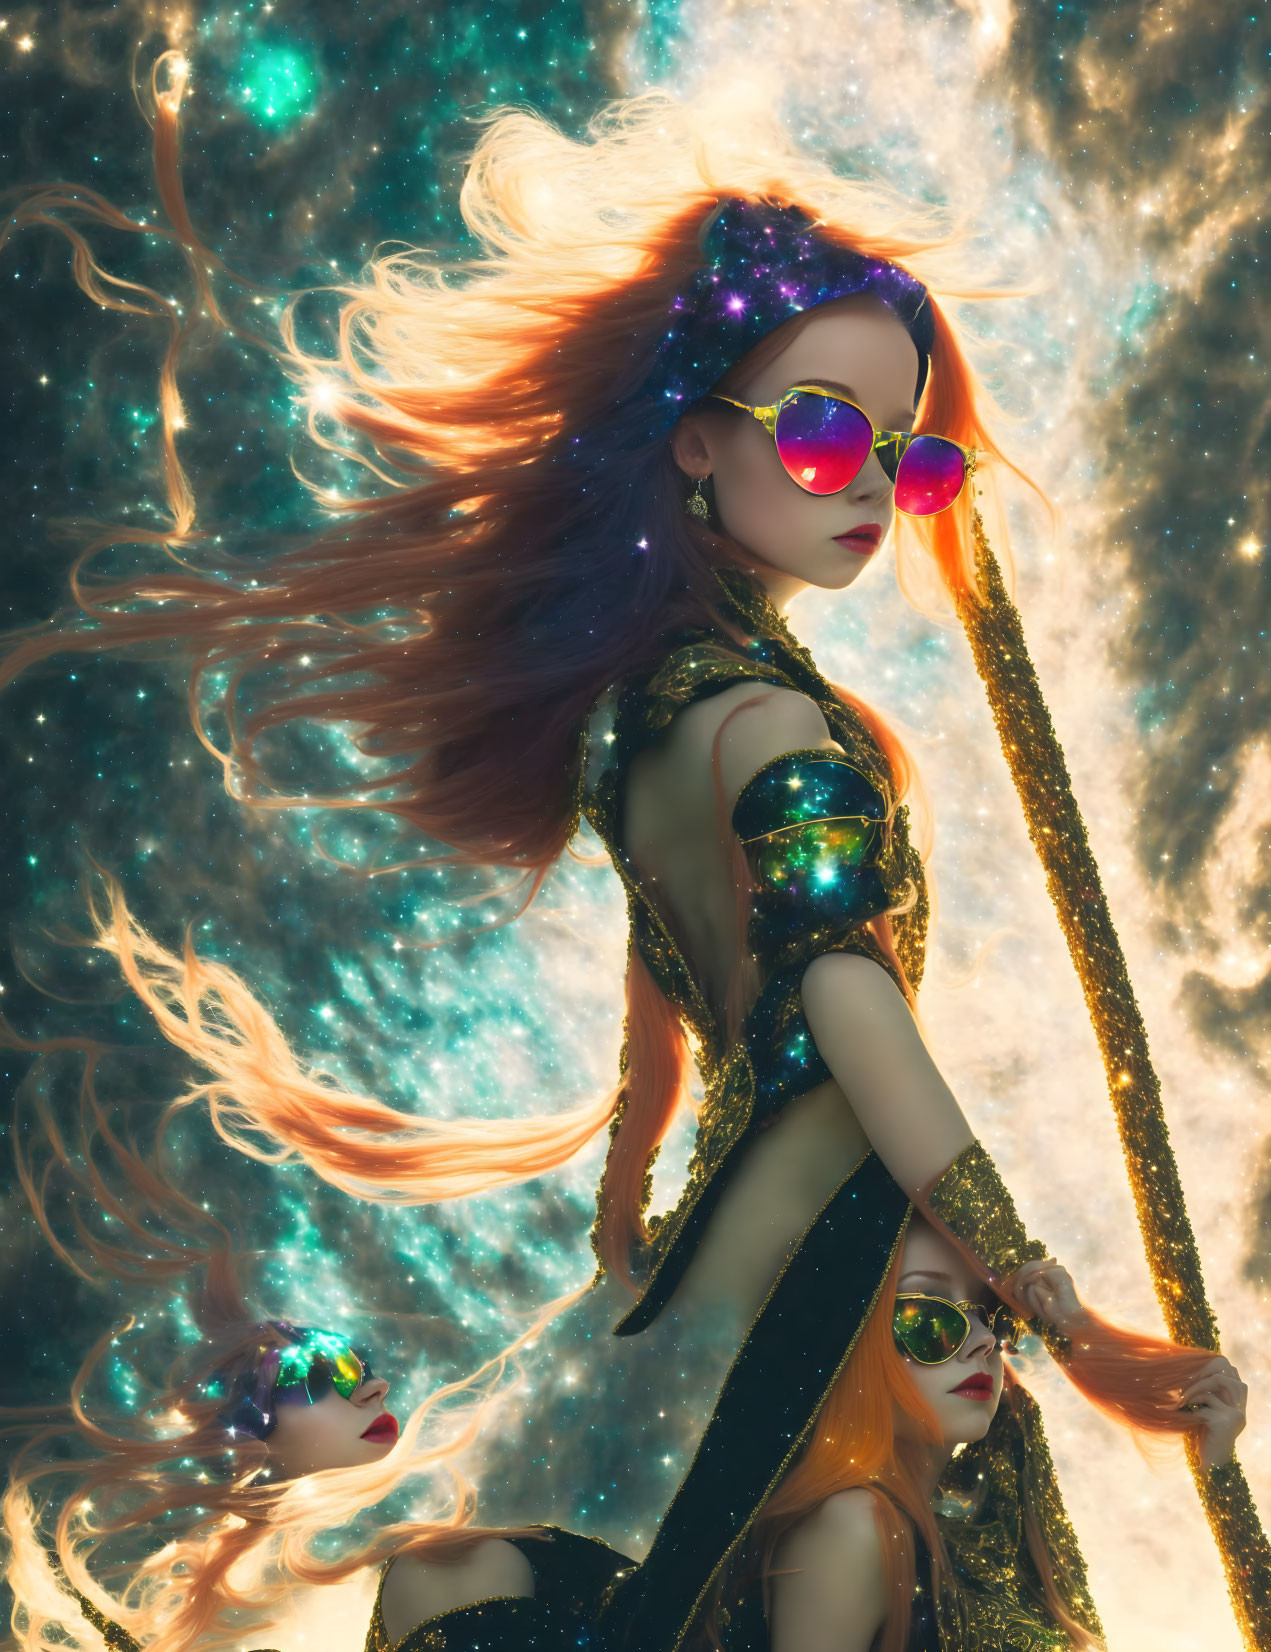 Doll with red hair and pink sunglasses in cosmic setting